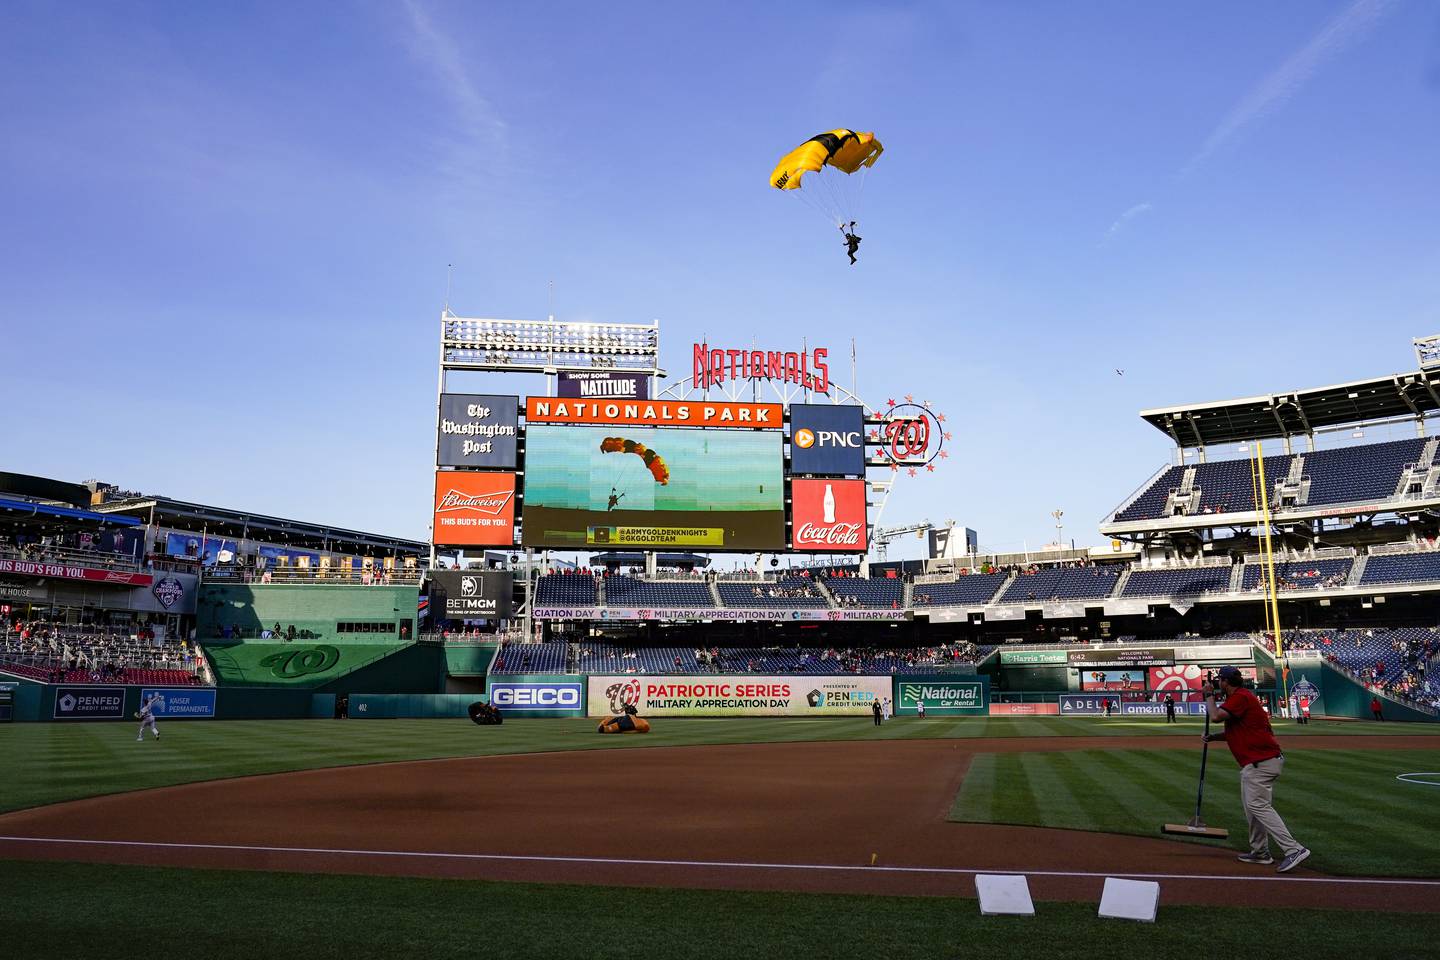 The US Capitol was briefly evacuated after police said they were tracking an aircraft 'that poses a probable threat', but it turned out to be a military aircraft with people parachuting out of it for the Washington Nationals game, officials told AP. AP